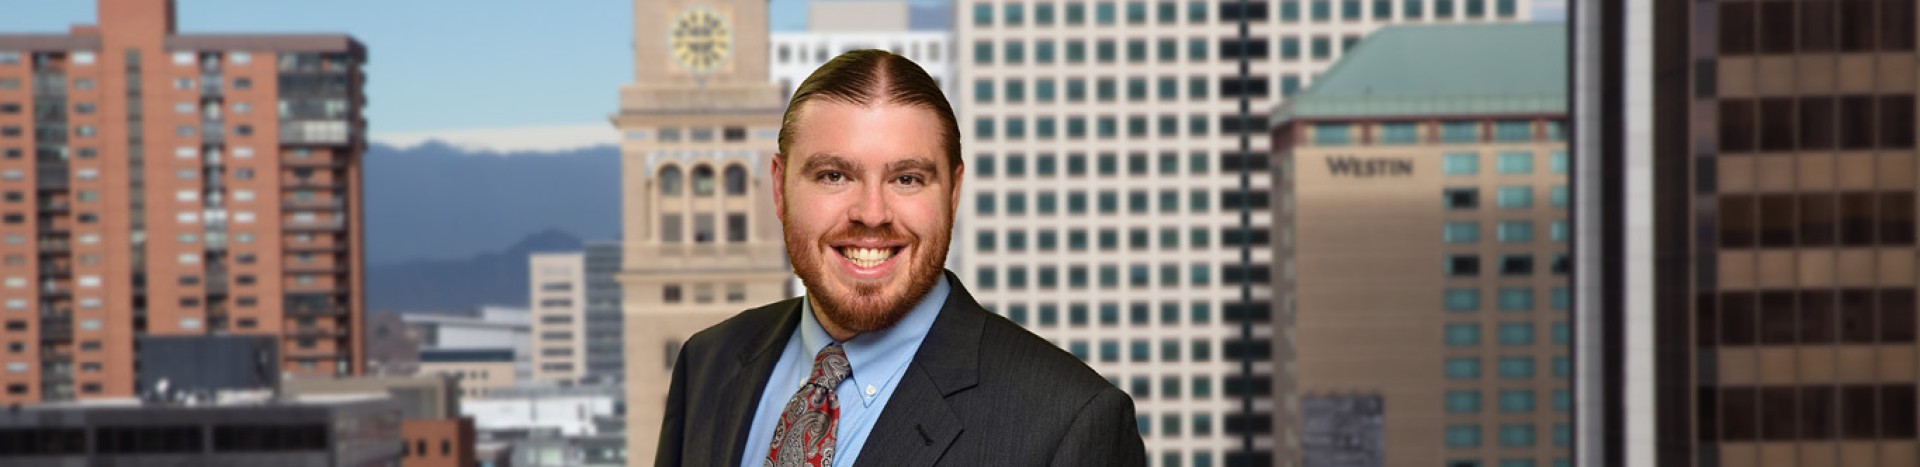 Denver Attorney Kirk McGill for McKnights Long-Term Care News In good news for providers, Supreme Court lowers bar on False Claims dismissals

